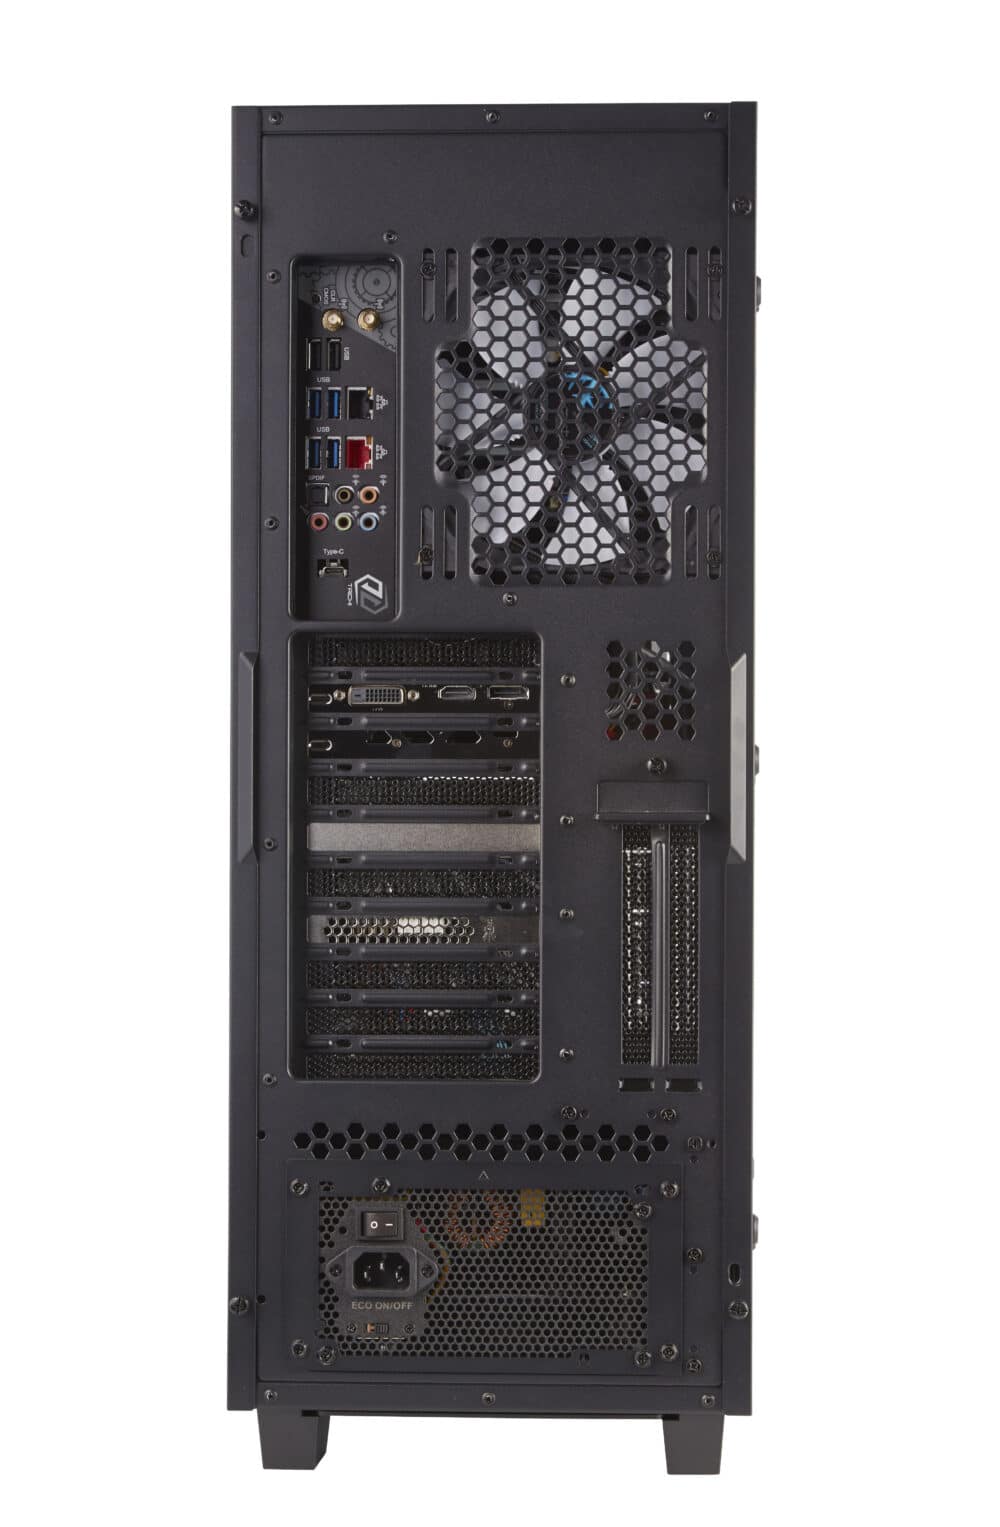 A black computer case with a fan on the side.